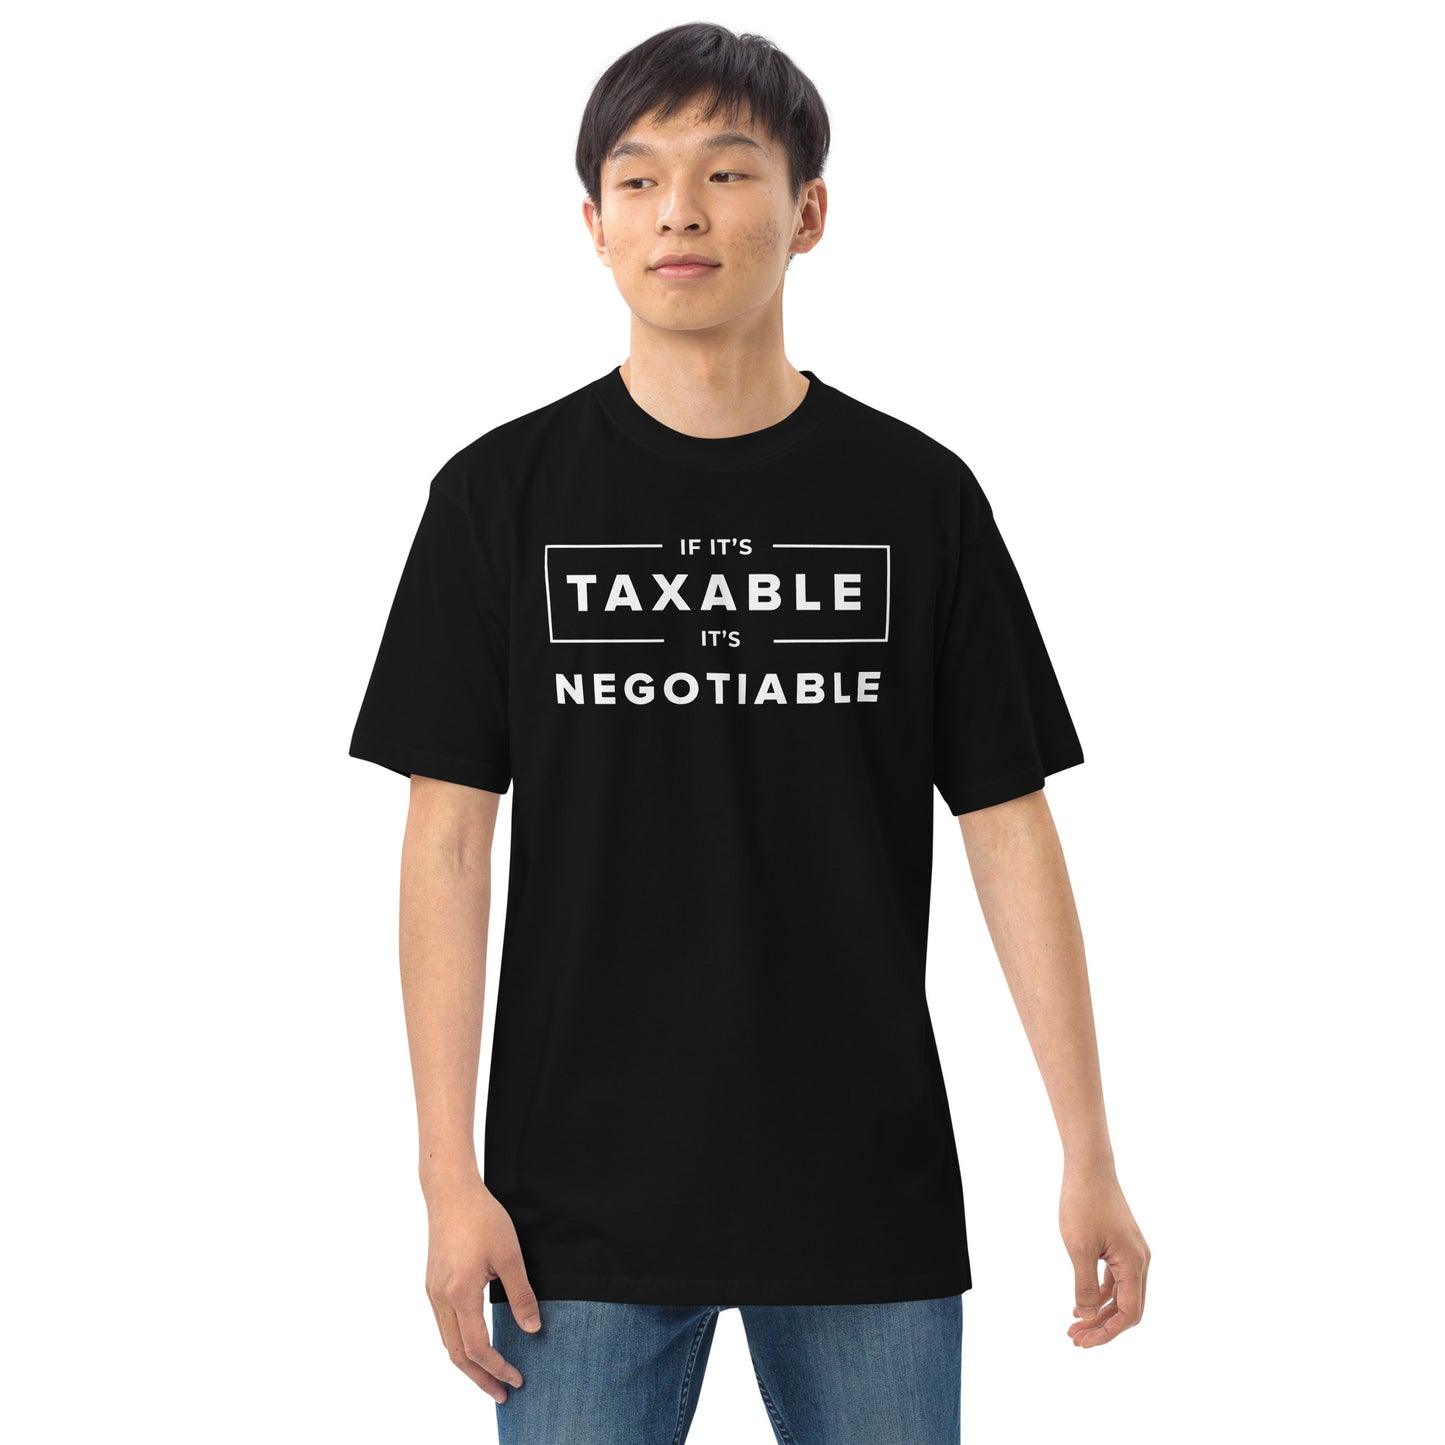 If it's taxable, it's negotiable - original - light